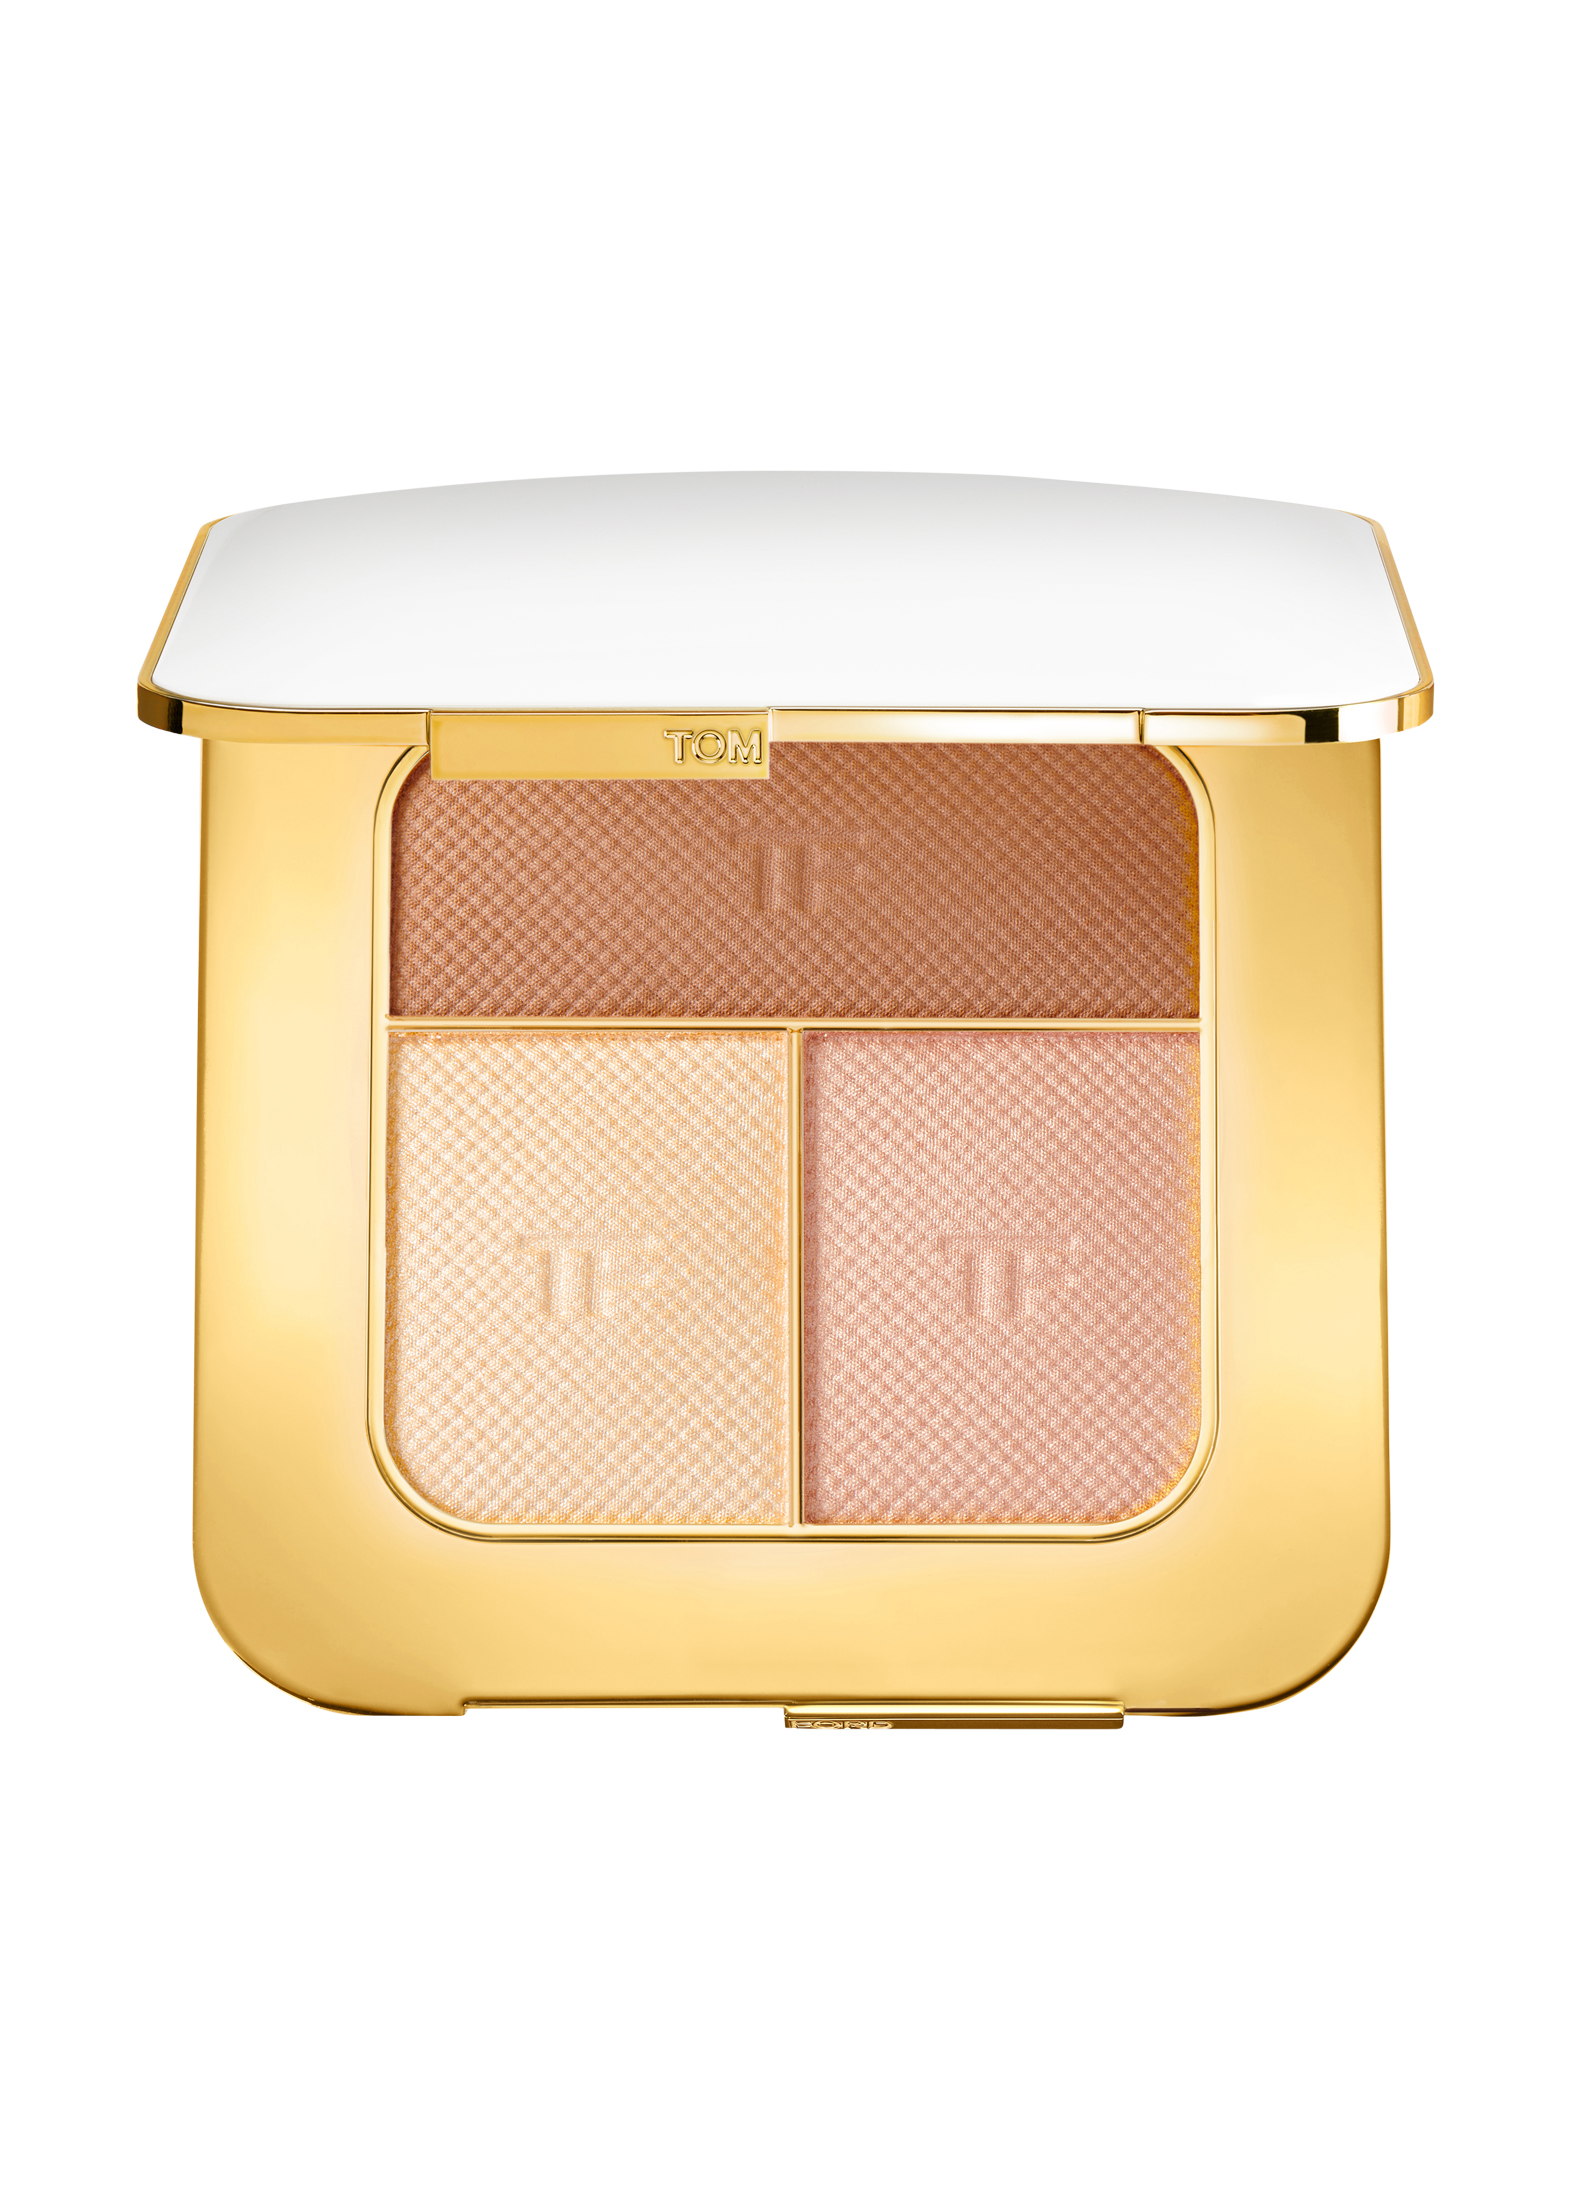 Tom Ford Soleil - Contouring Compact, 20g TOM FORD SOLEIL CO image number 0